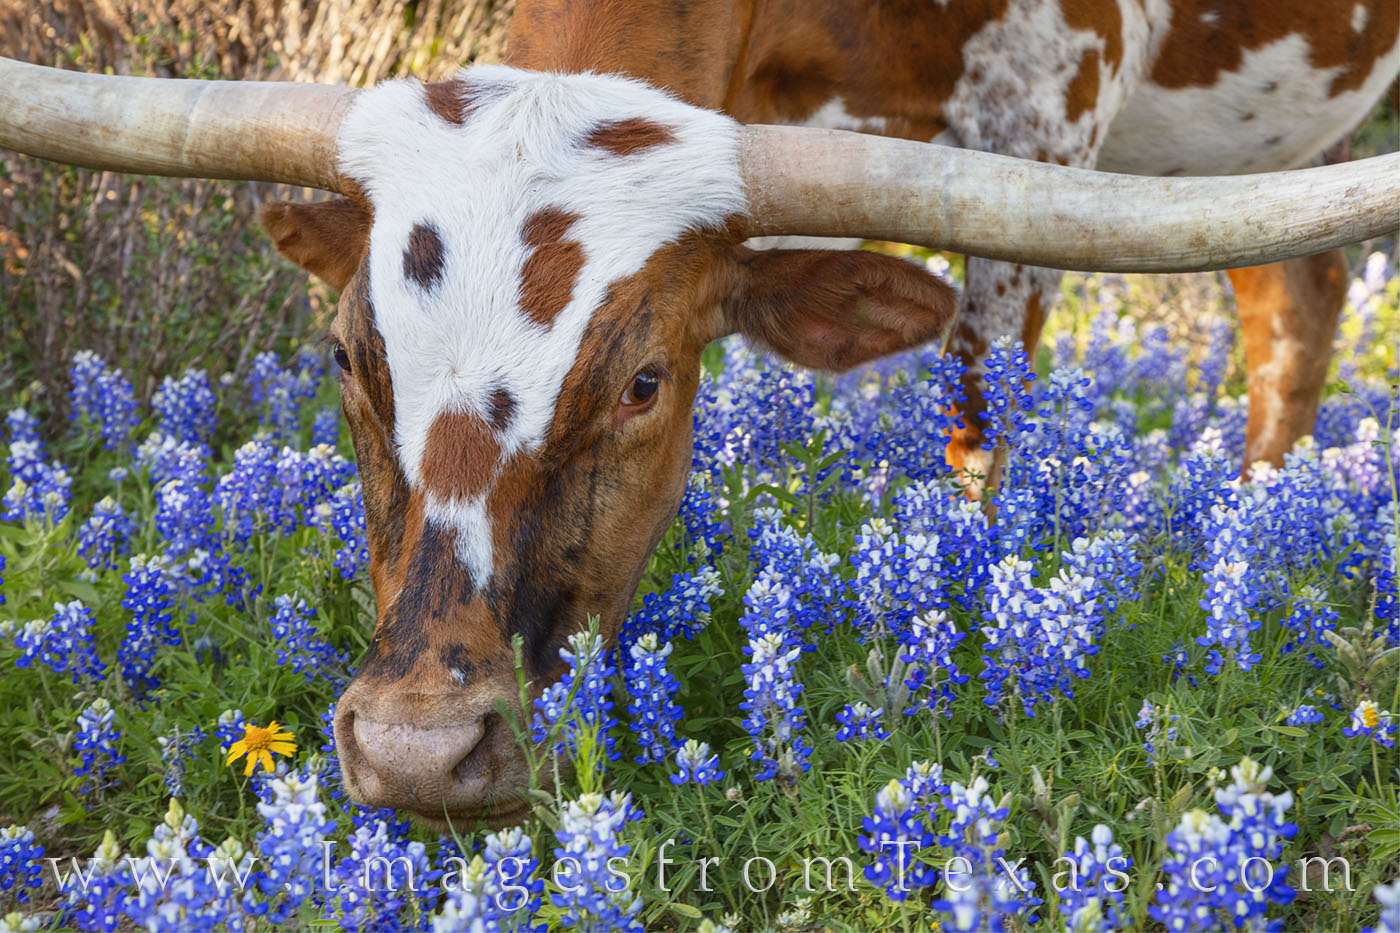 This longhorn was weeding through the bluebonnets looking for real food (grass, I think). Several longhorns scoured this field...